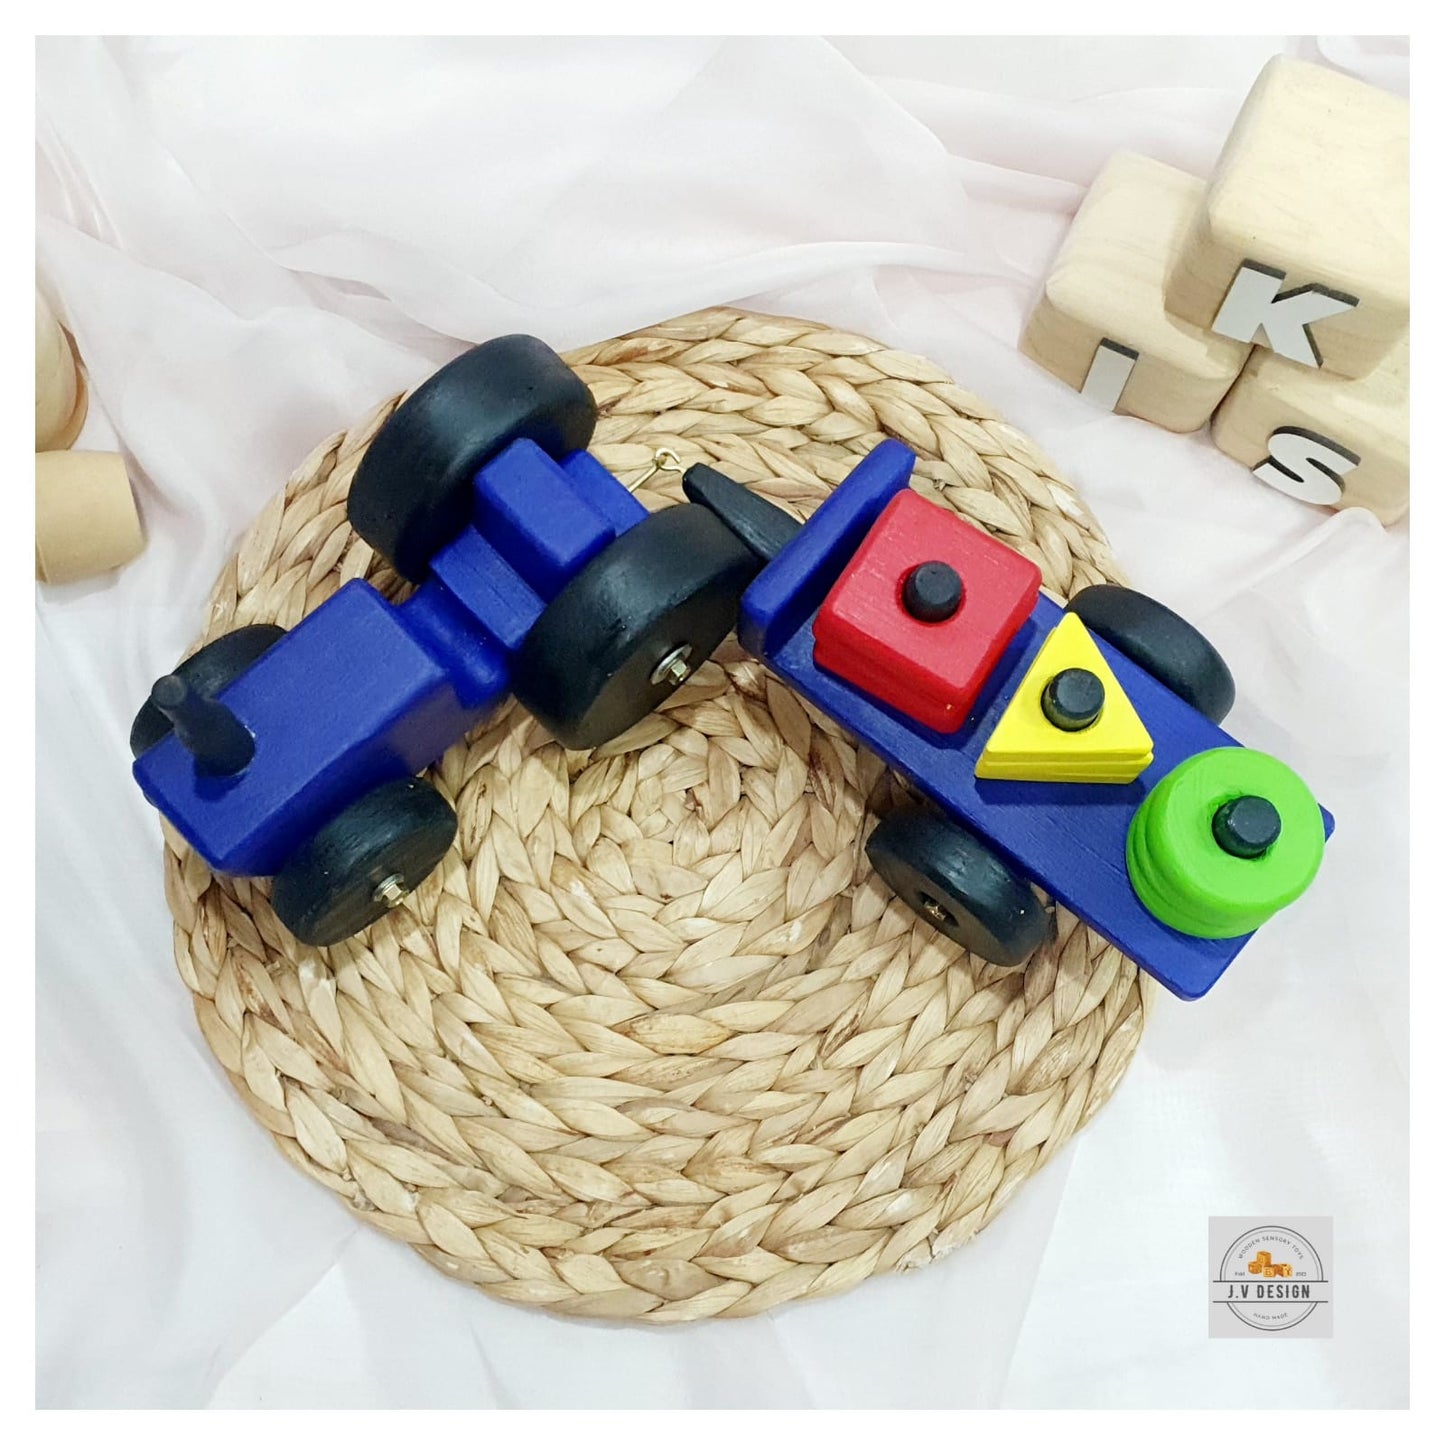 Wooden Toy Tractor